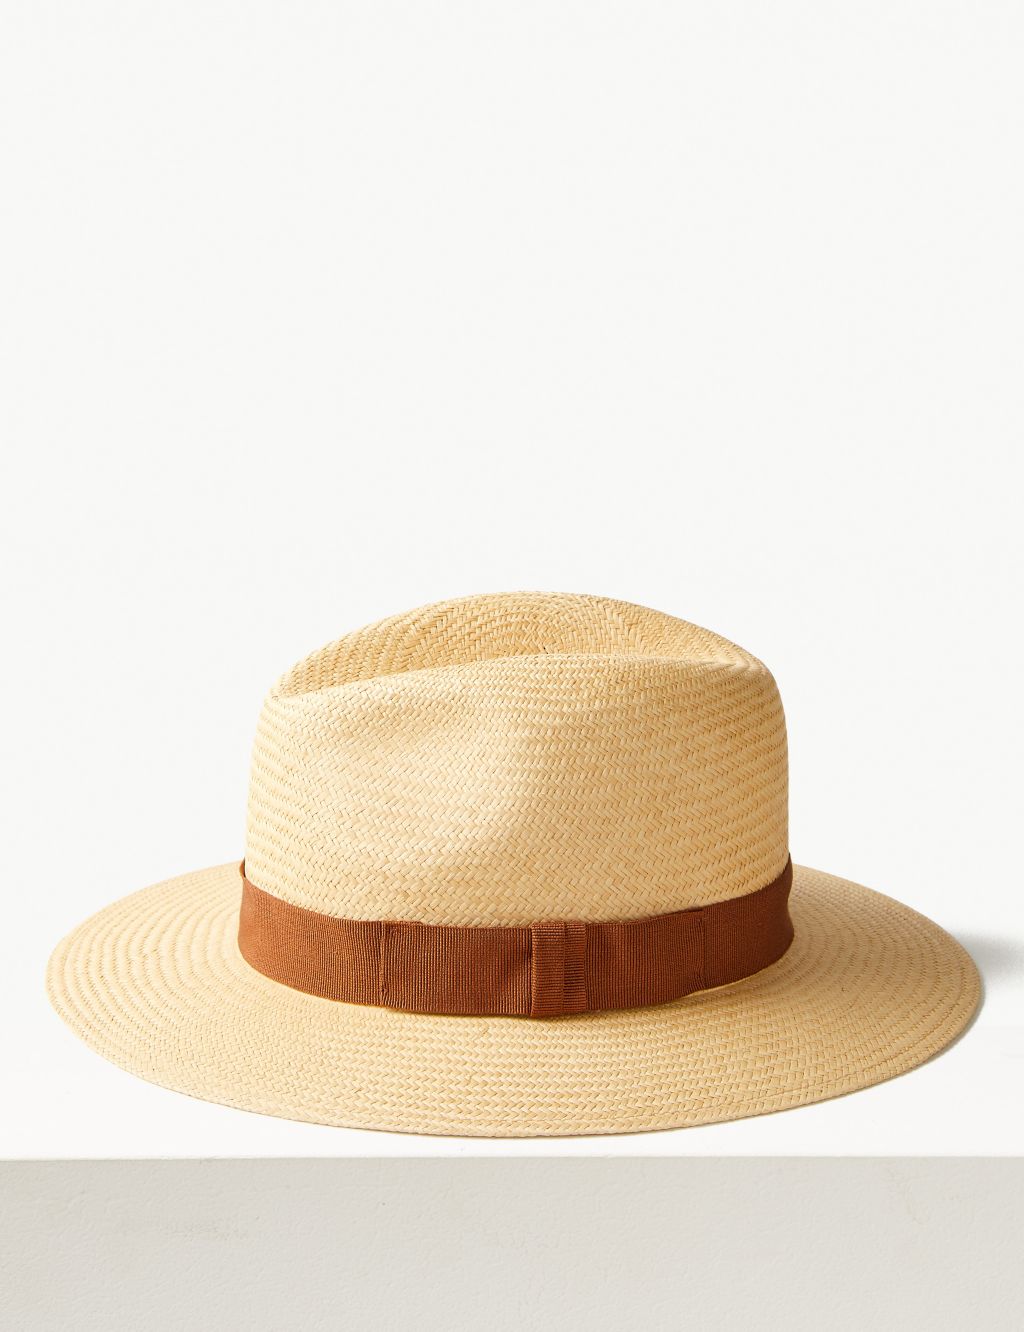 Luxury Panama Hat Made by Christys’ 3 of 4